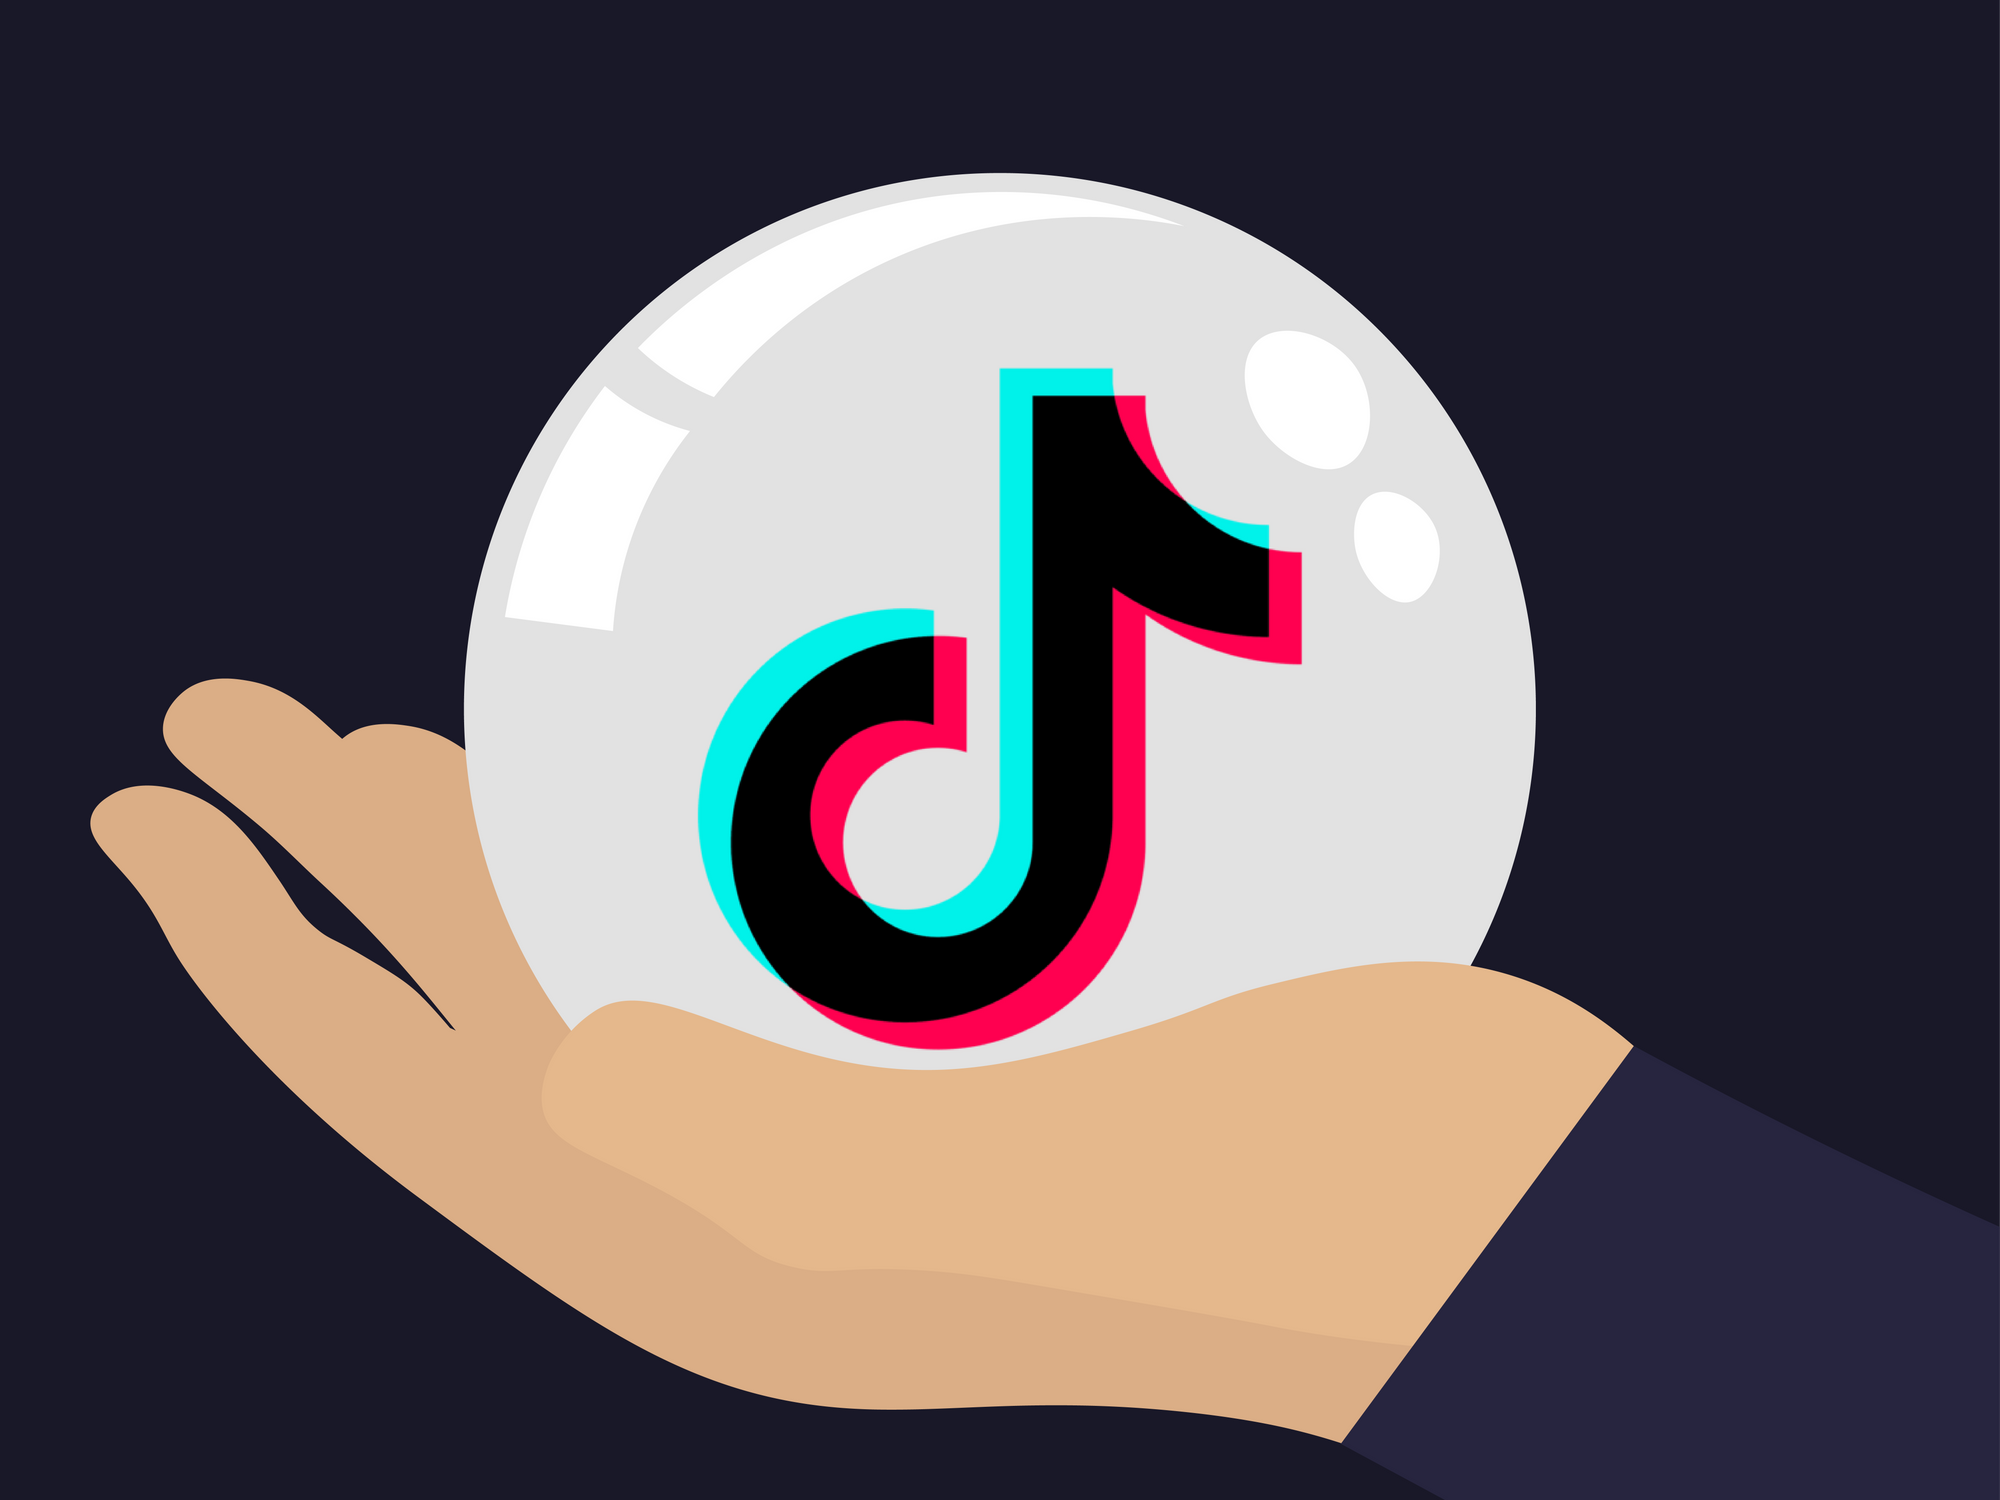 I Spent a Week Analyzing TikTok’s Latest Transparency Feature. Here’s What I Learned